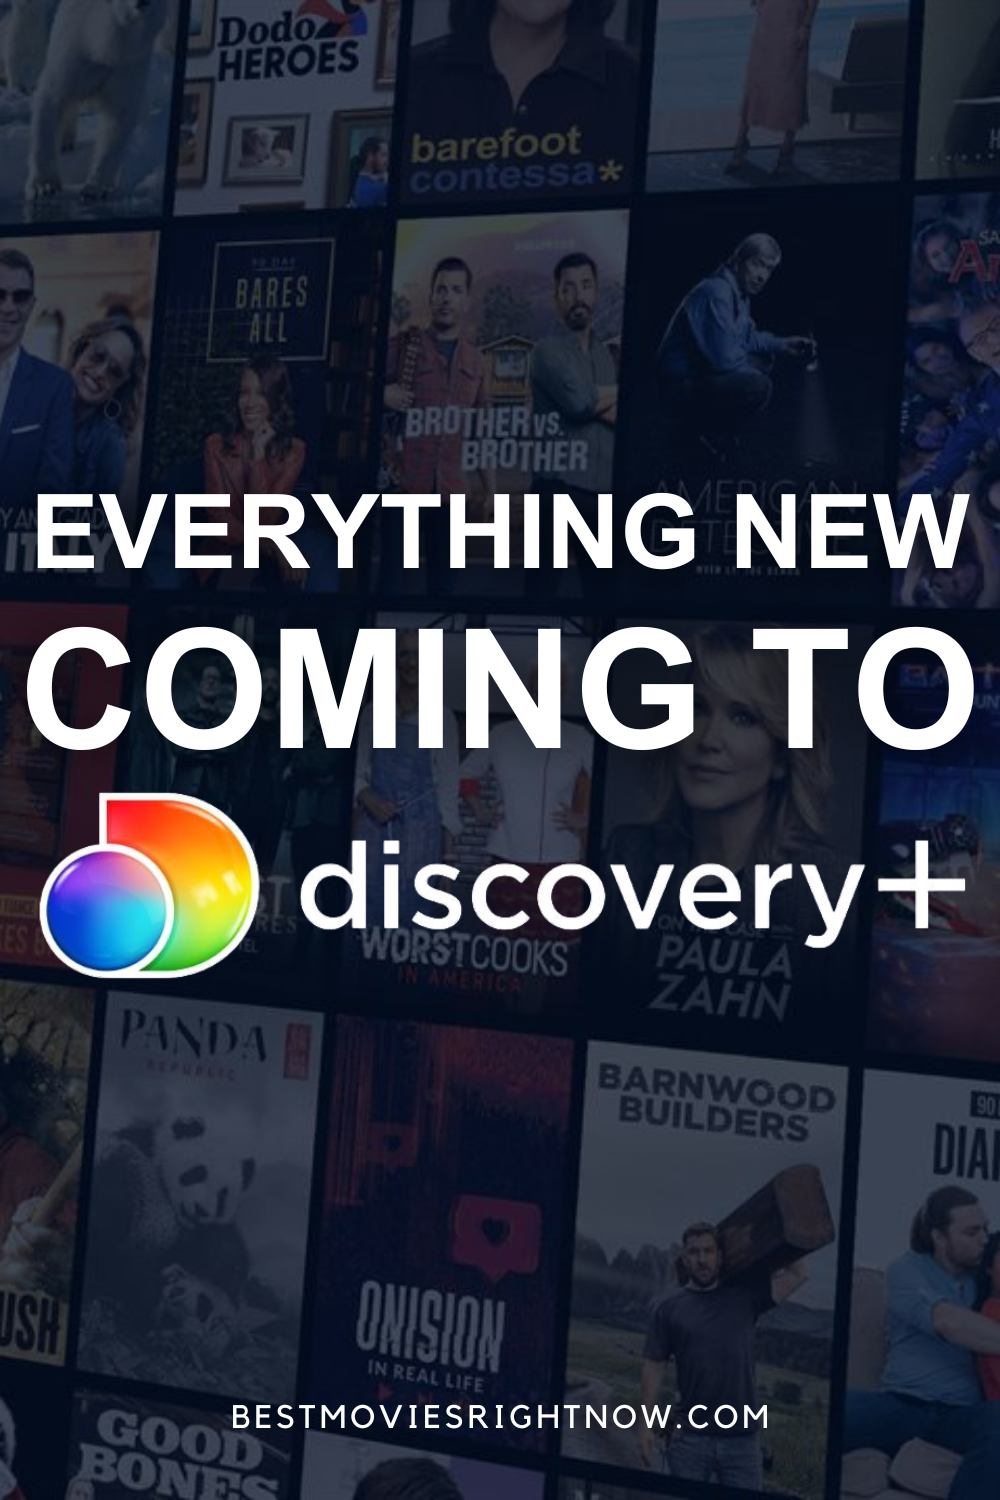 everything coming to Discovery+ pin image with text overlay